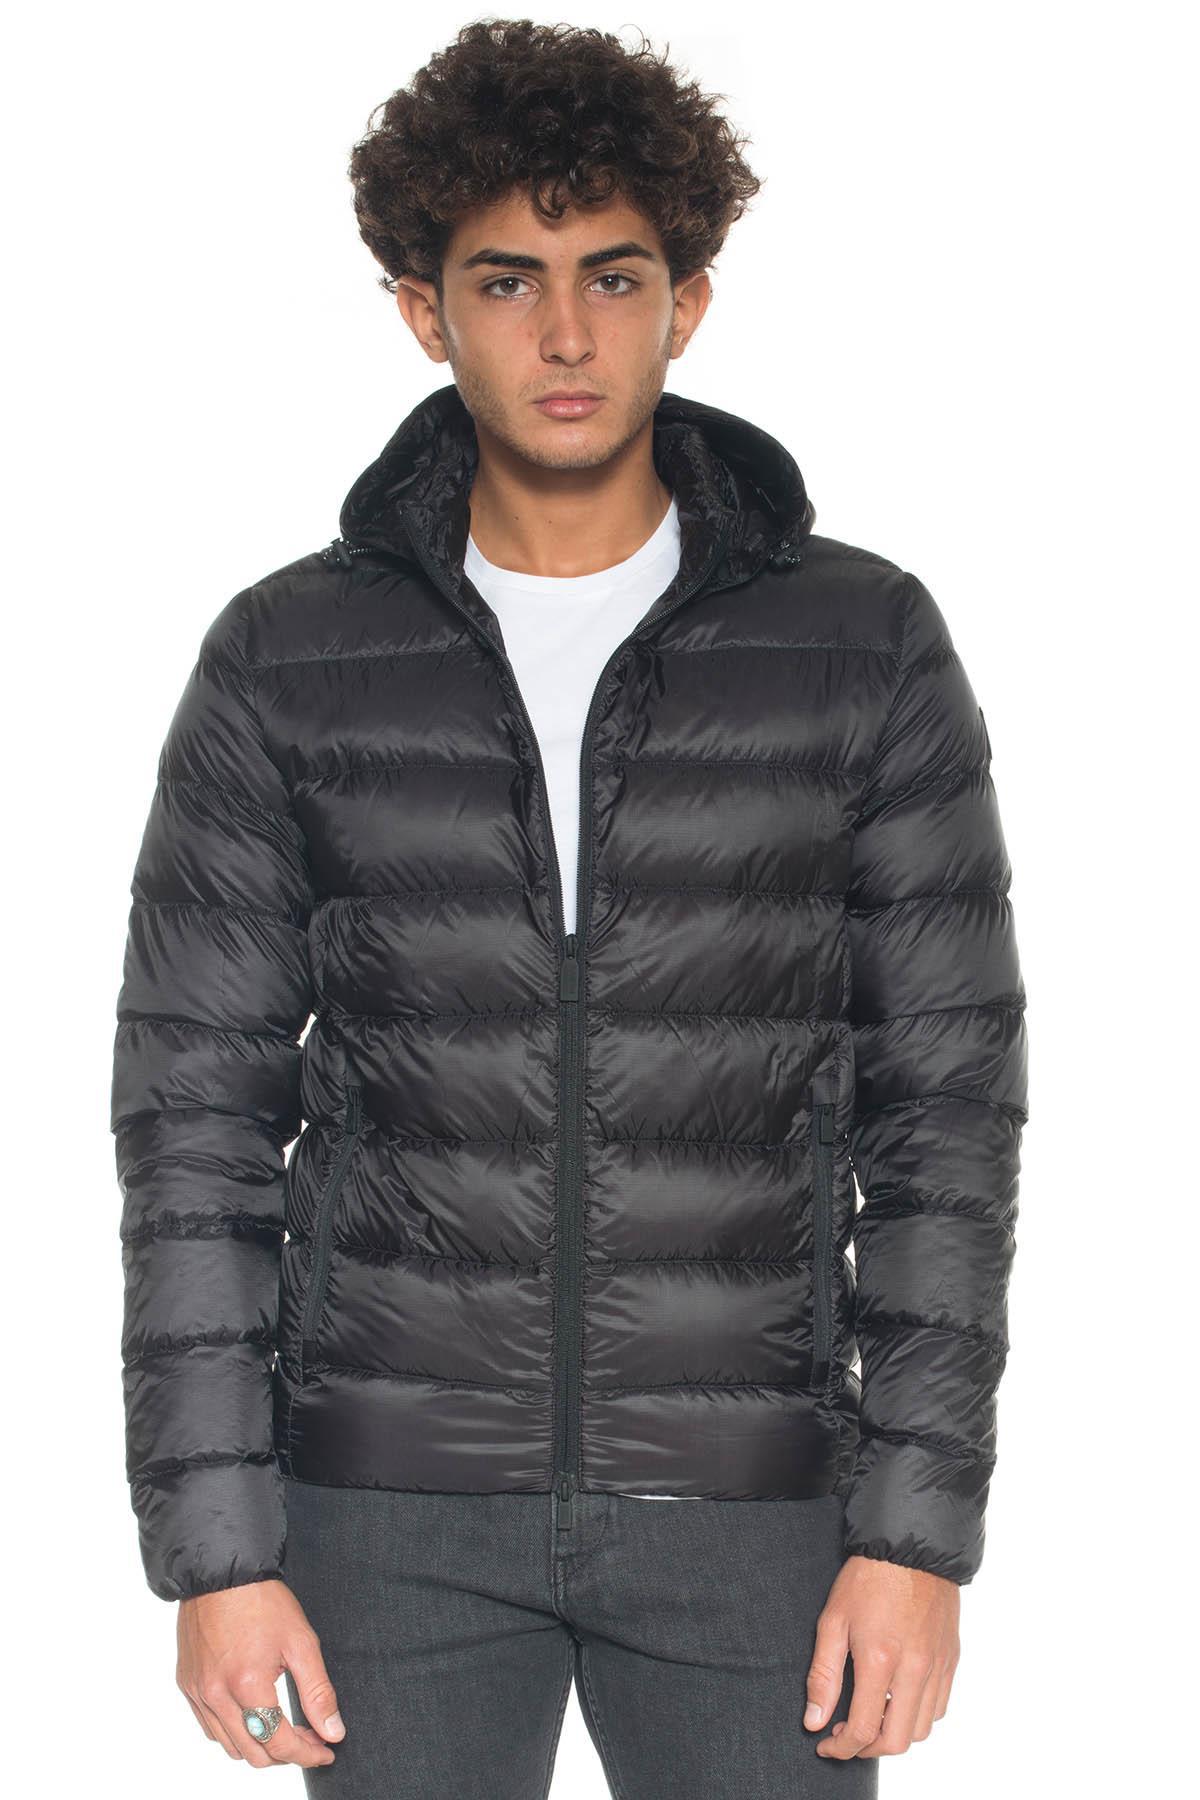 Lyst - Ciesse Piumini Quilted Down Jacket in Black for Men - Save 5%